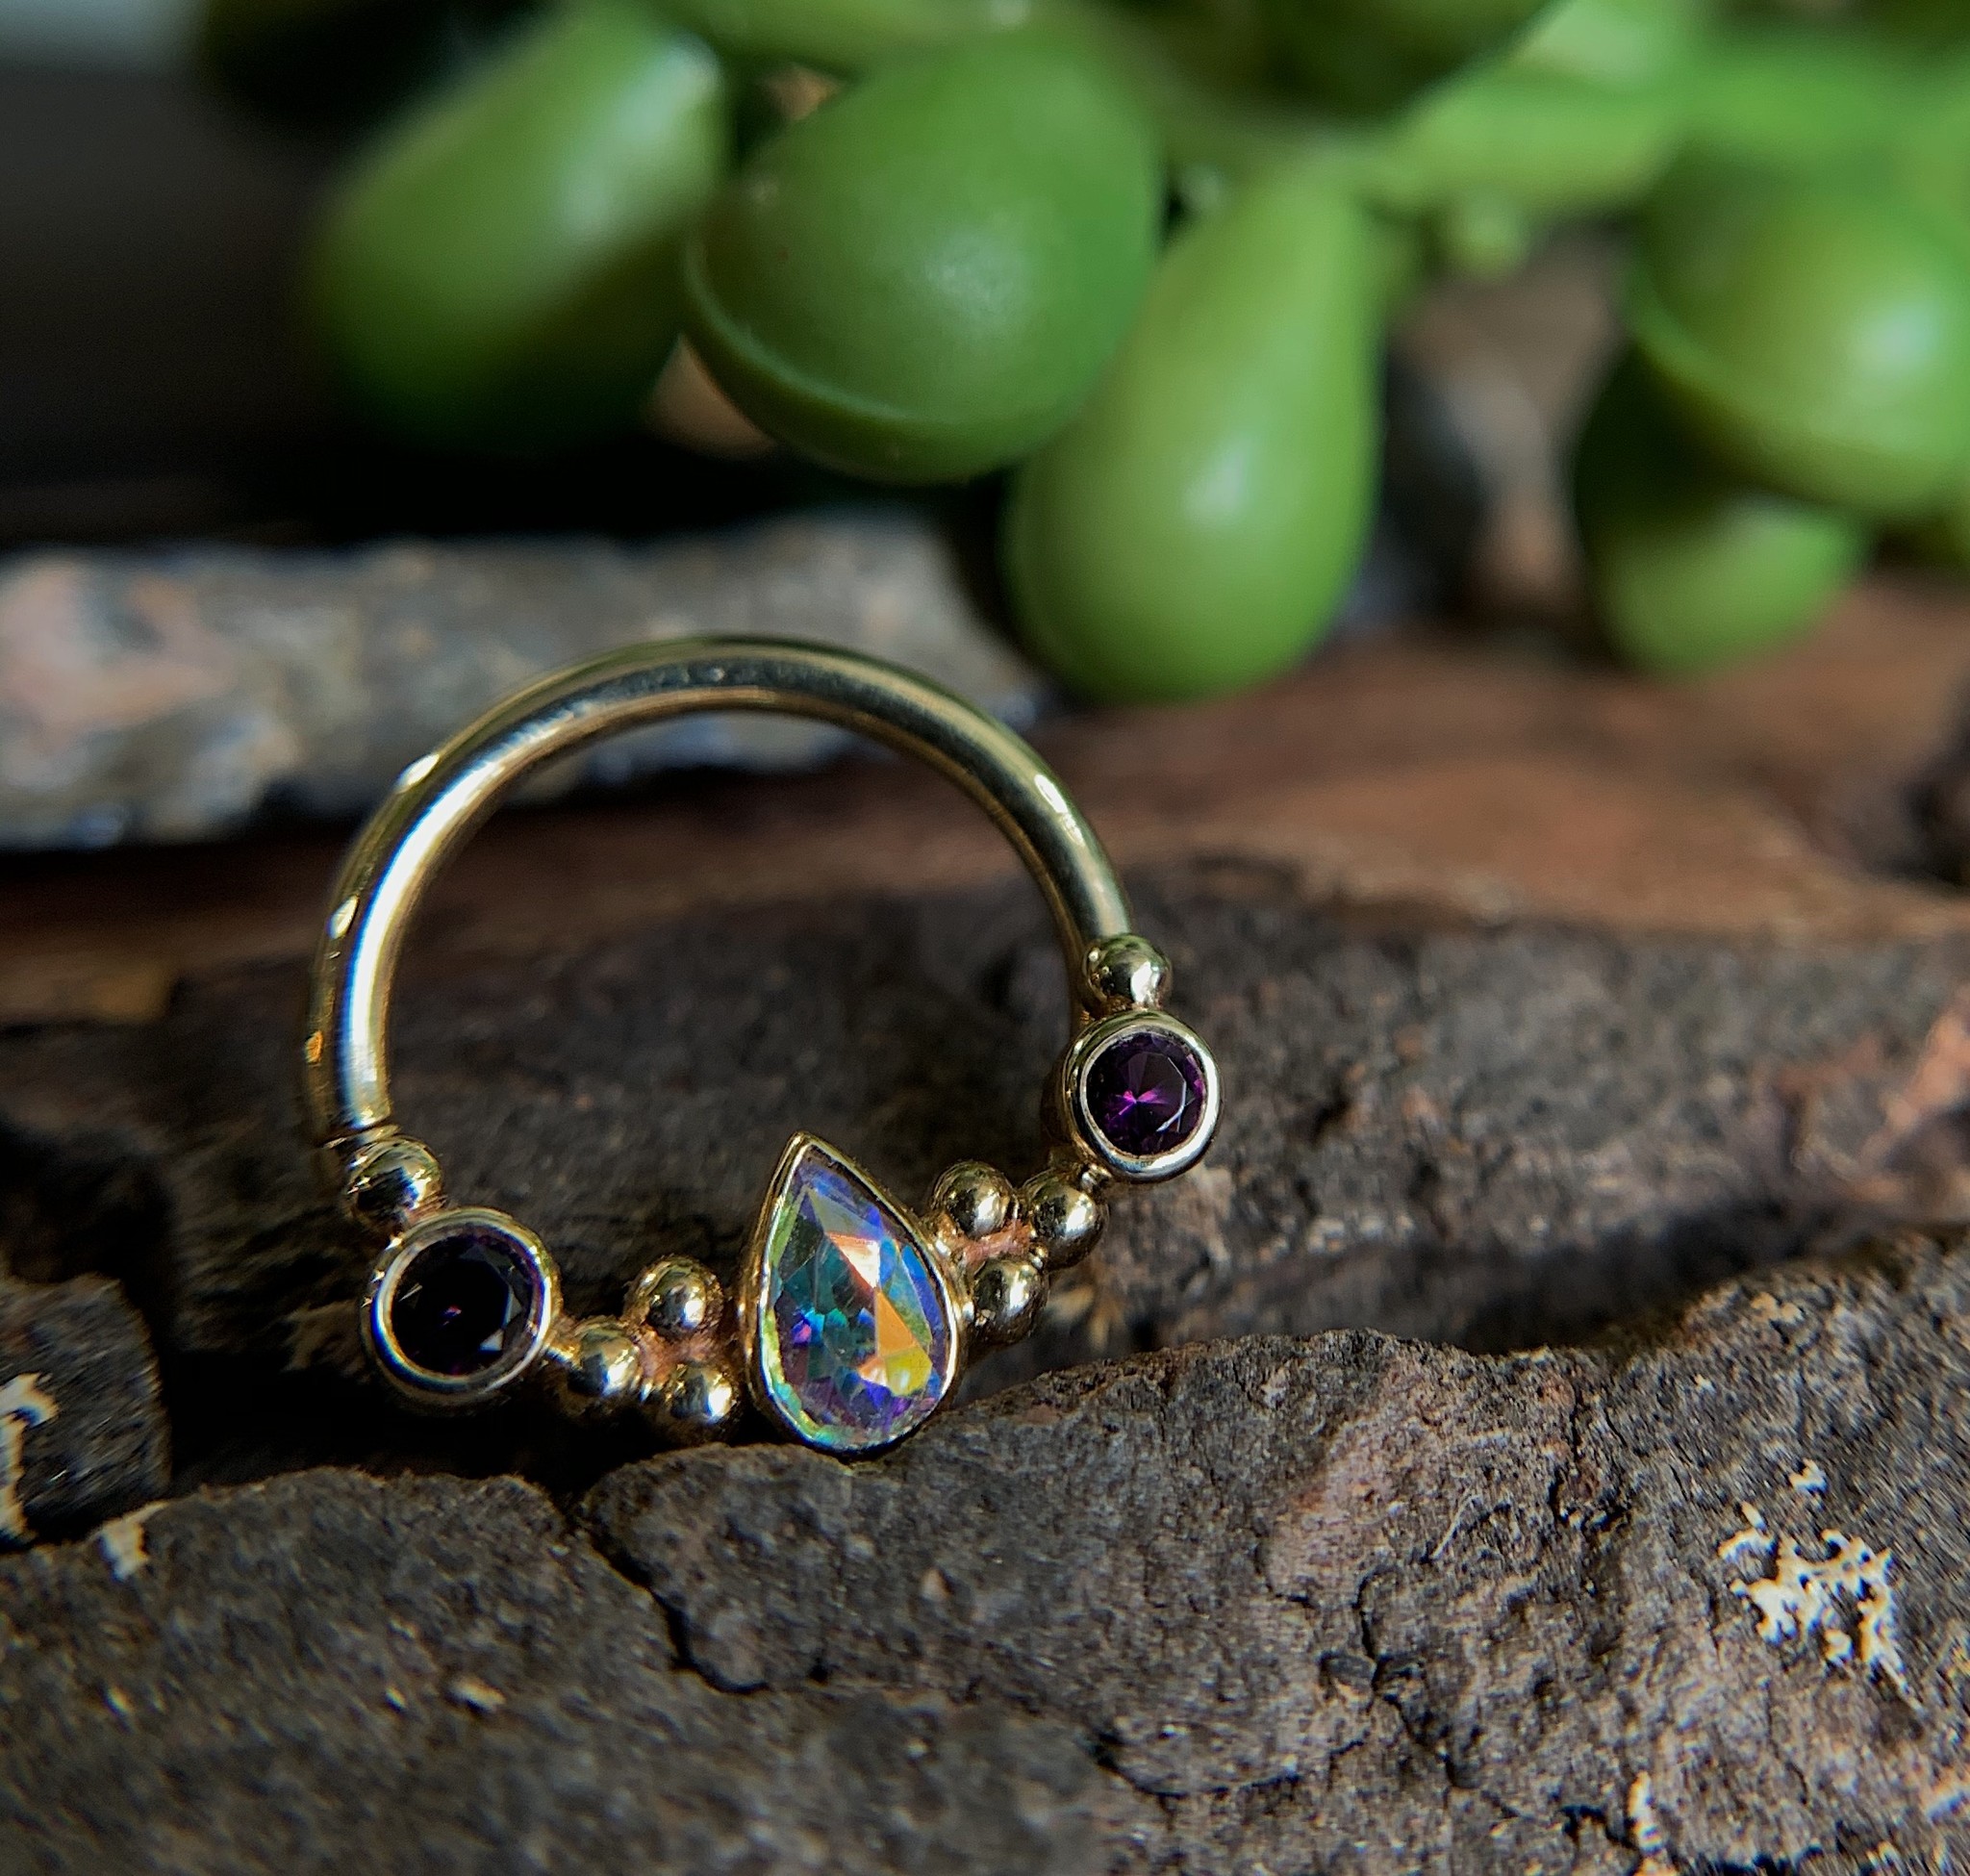 16g 3/8 "Inside Out Eden Pear"  with Mystic Topaz & Amethyst by BVLA